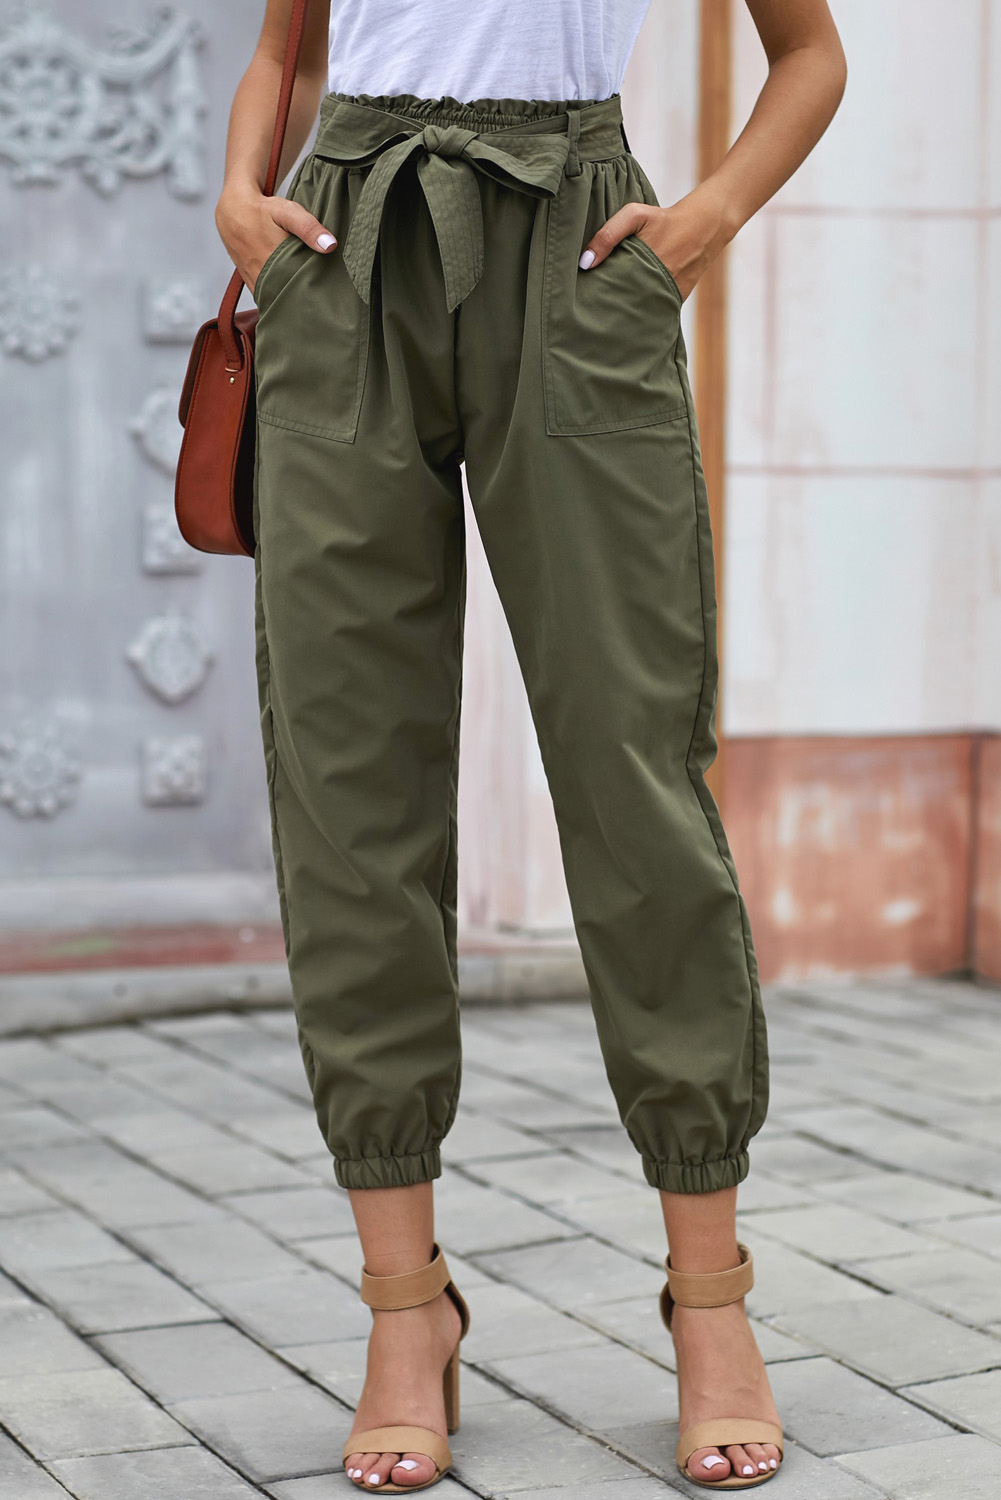 New arrivals 2023 Green Solid Color Frock-style Pants with BELT